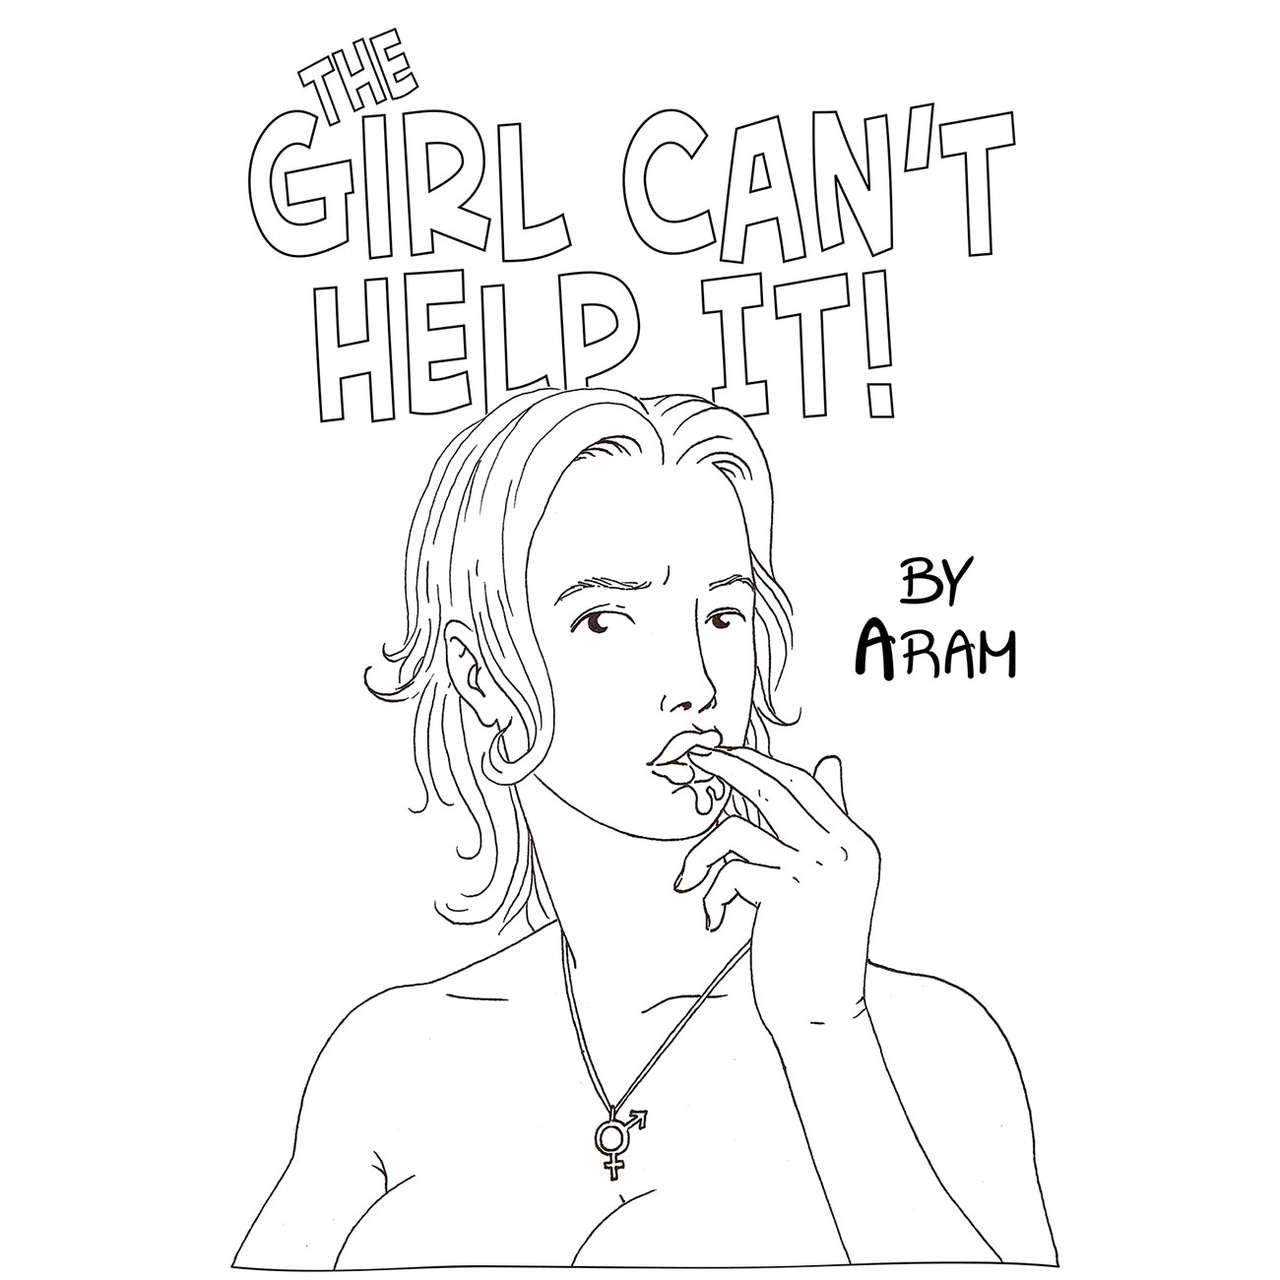 [Aram] The Girl Can't Help It (updated 11/18/2015) 1